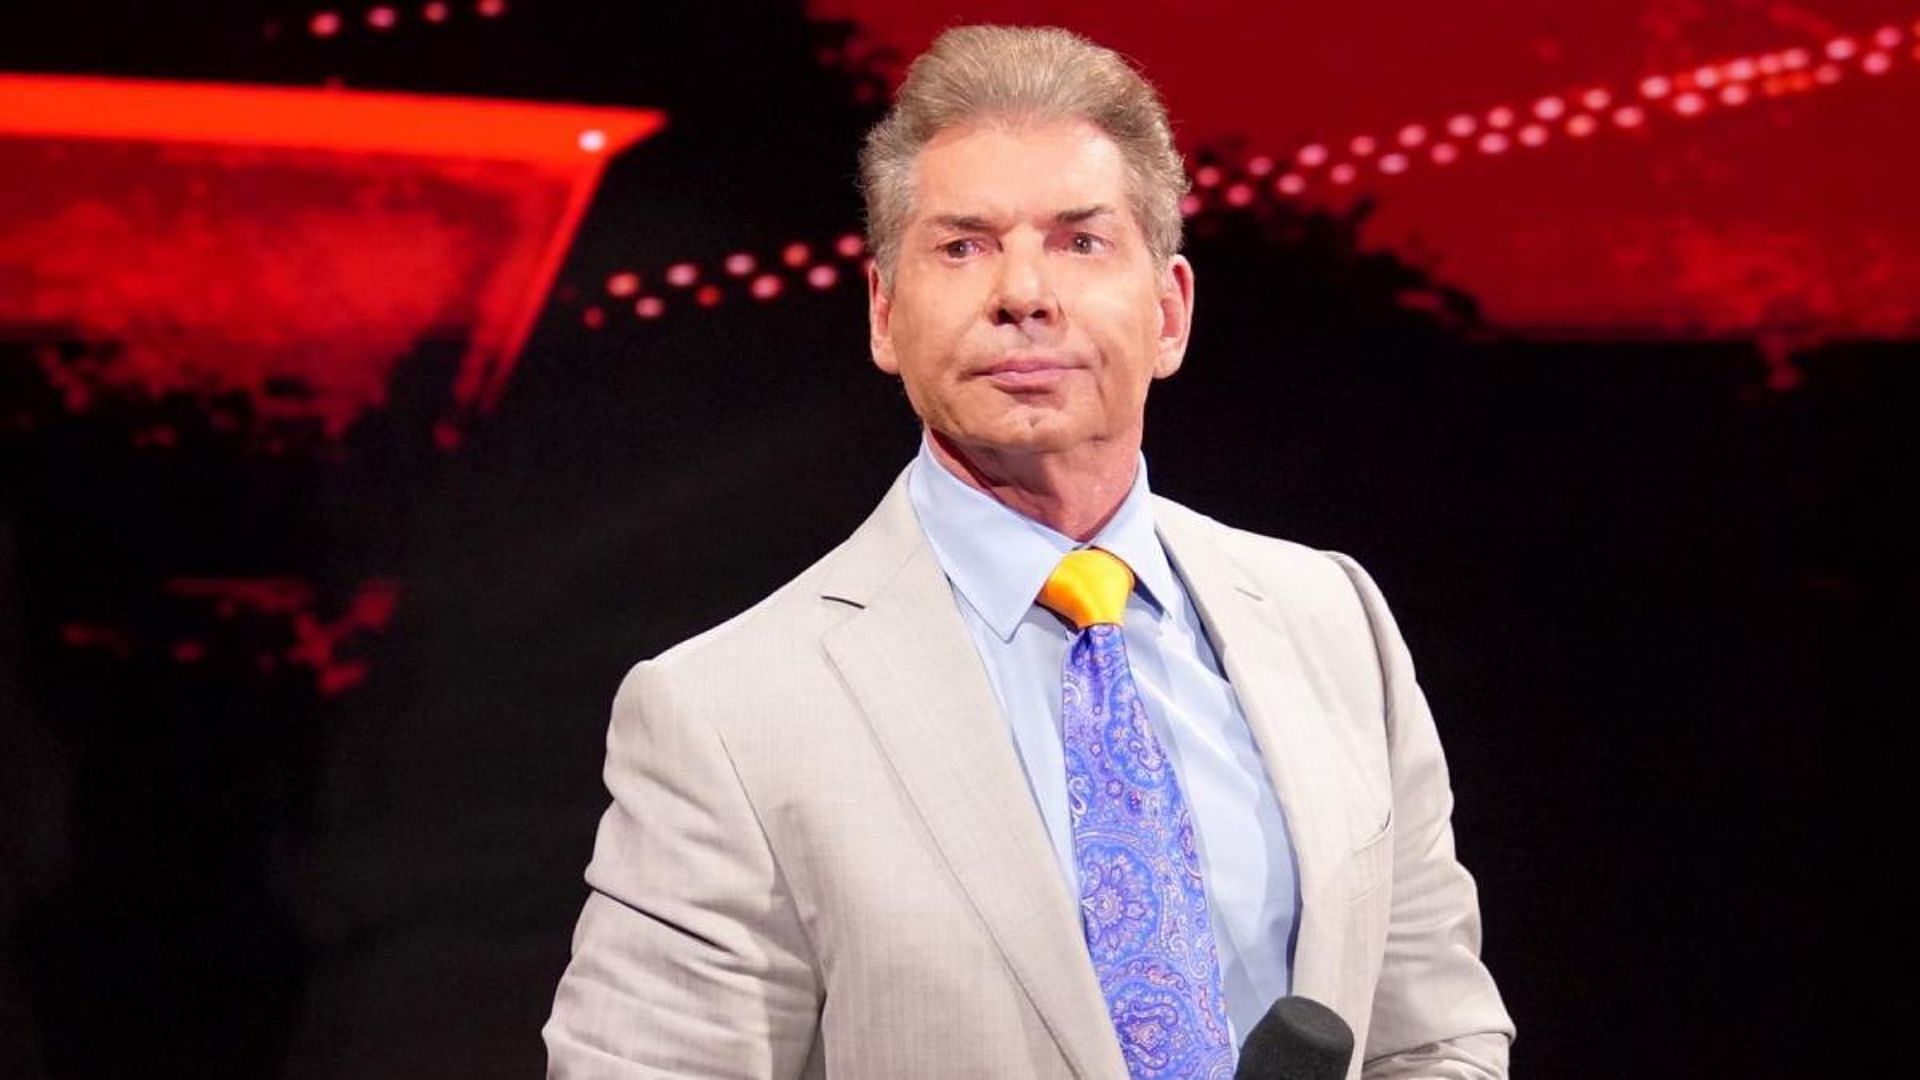 Vince McMahon made the shocking revelation that he would be retiring